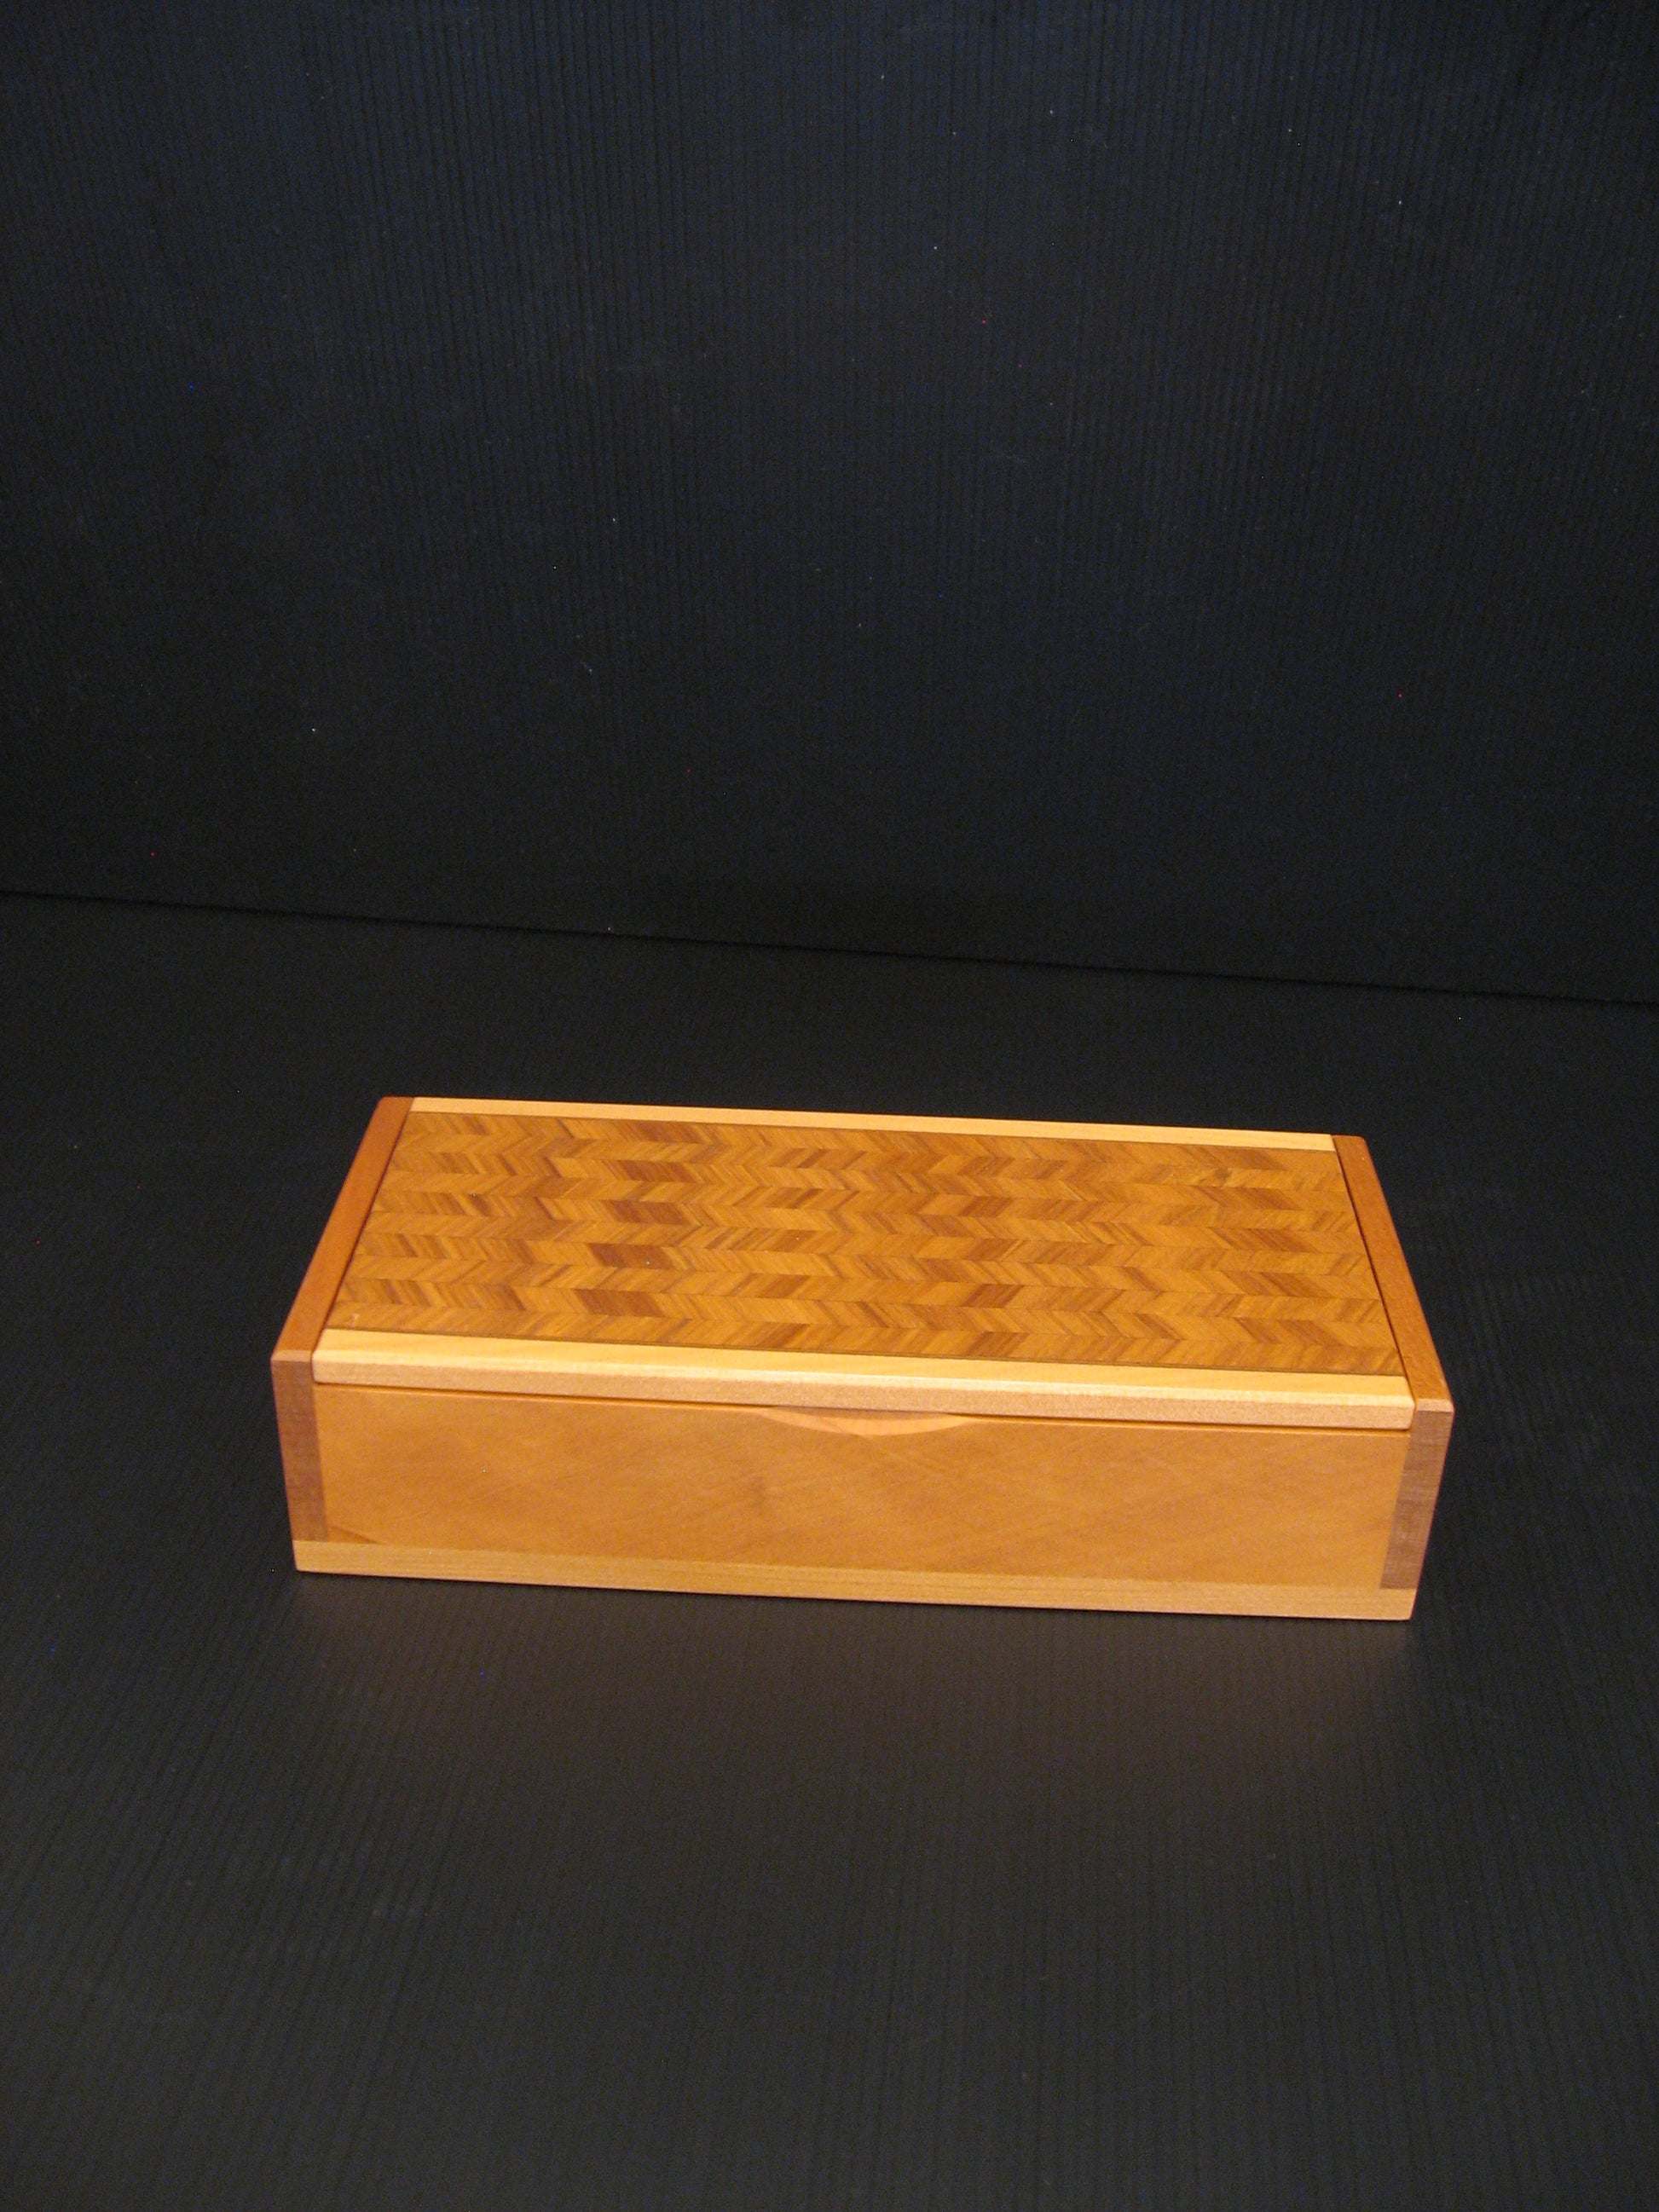 Kauri Wooden Zigzag Patterned Jewellery Box by Timber Arts NZ Silver Fern Gallery